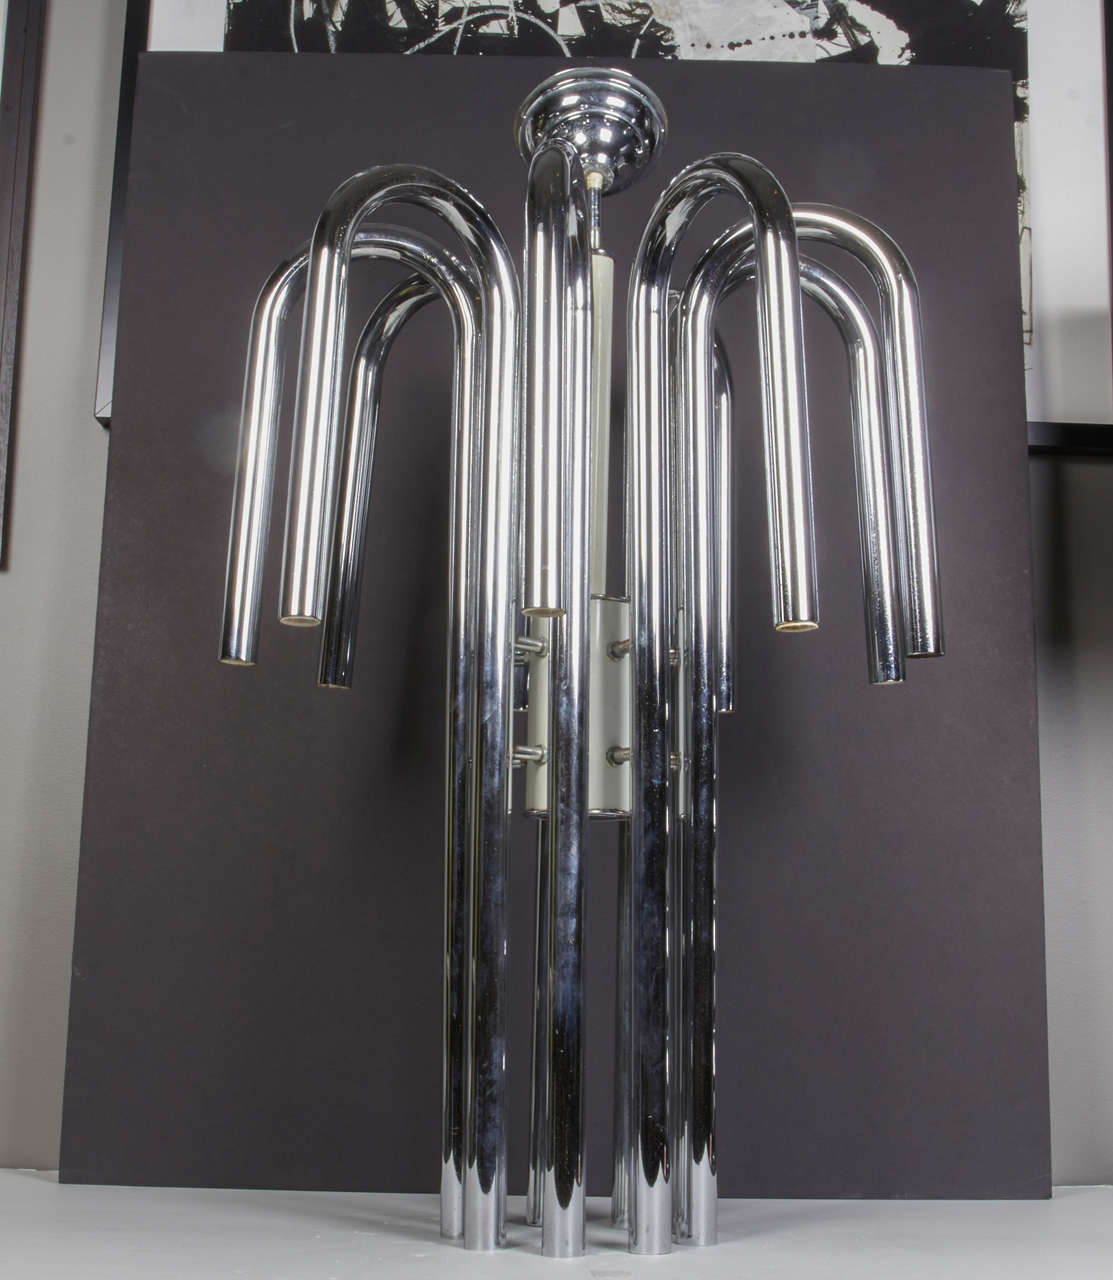 Impressive 1970s modernist waterfall chandelier. Elegant design as well as great light output. Nine sockets on top tubes and nine sockets on bottom tubes. It takes a total of eighteen 25 watt max chandelier bulbs. It is mostly chromed steel with